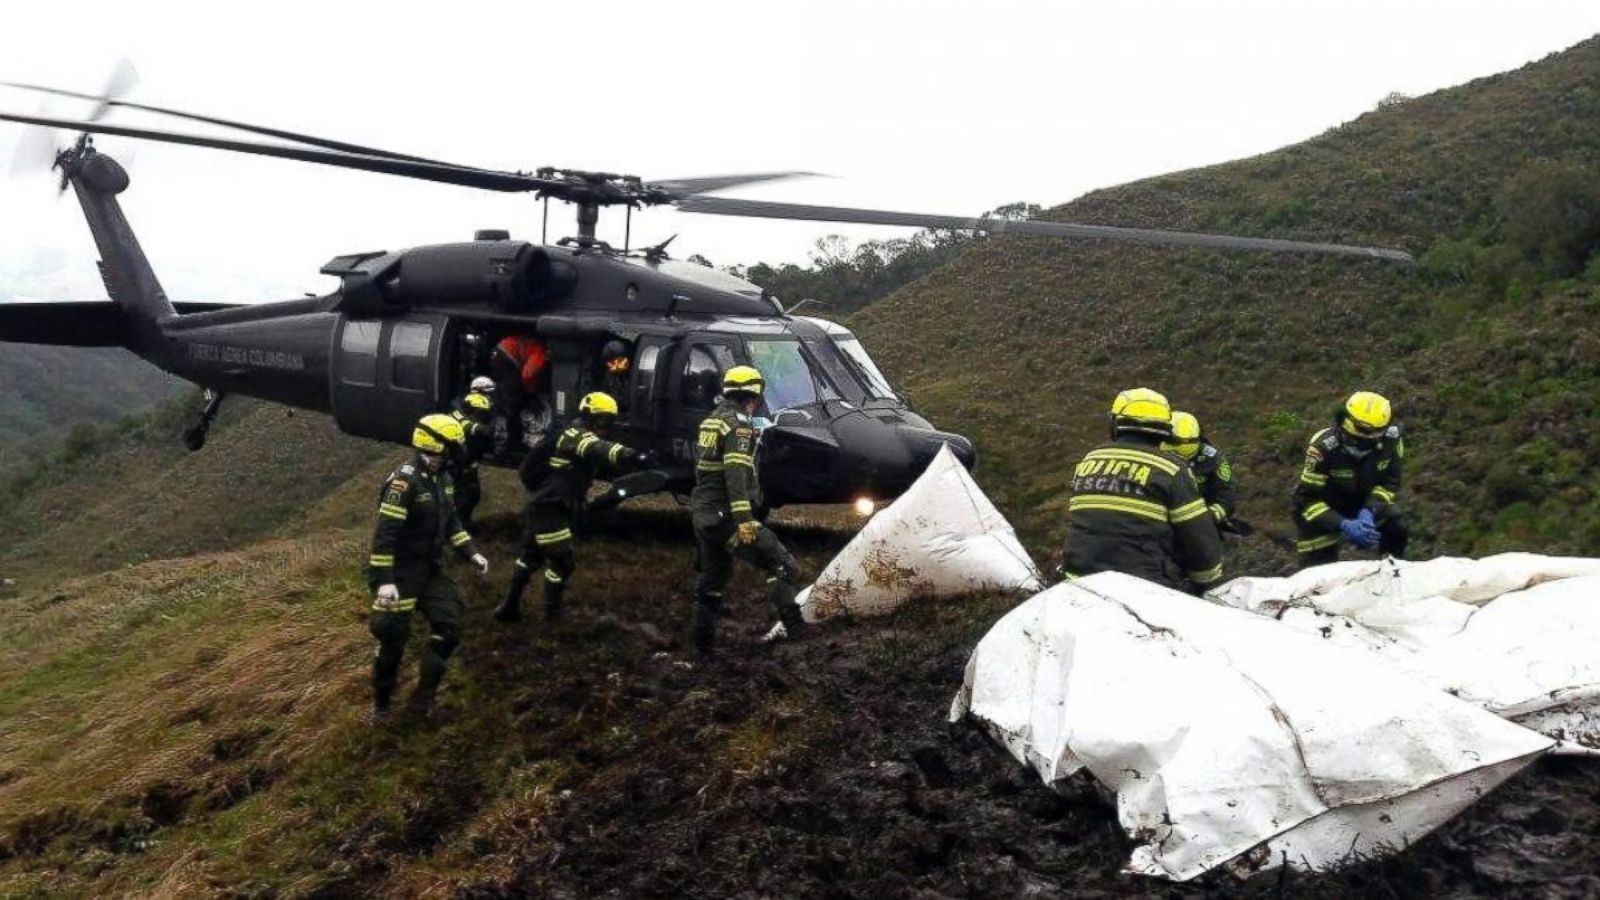 Charter Plane Crashes in Colombia Photos Image 91 ABC News